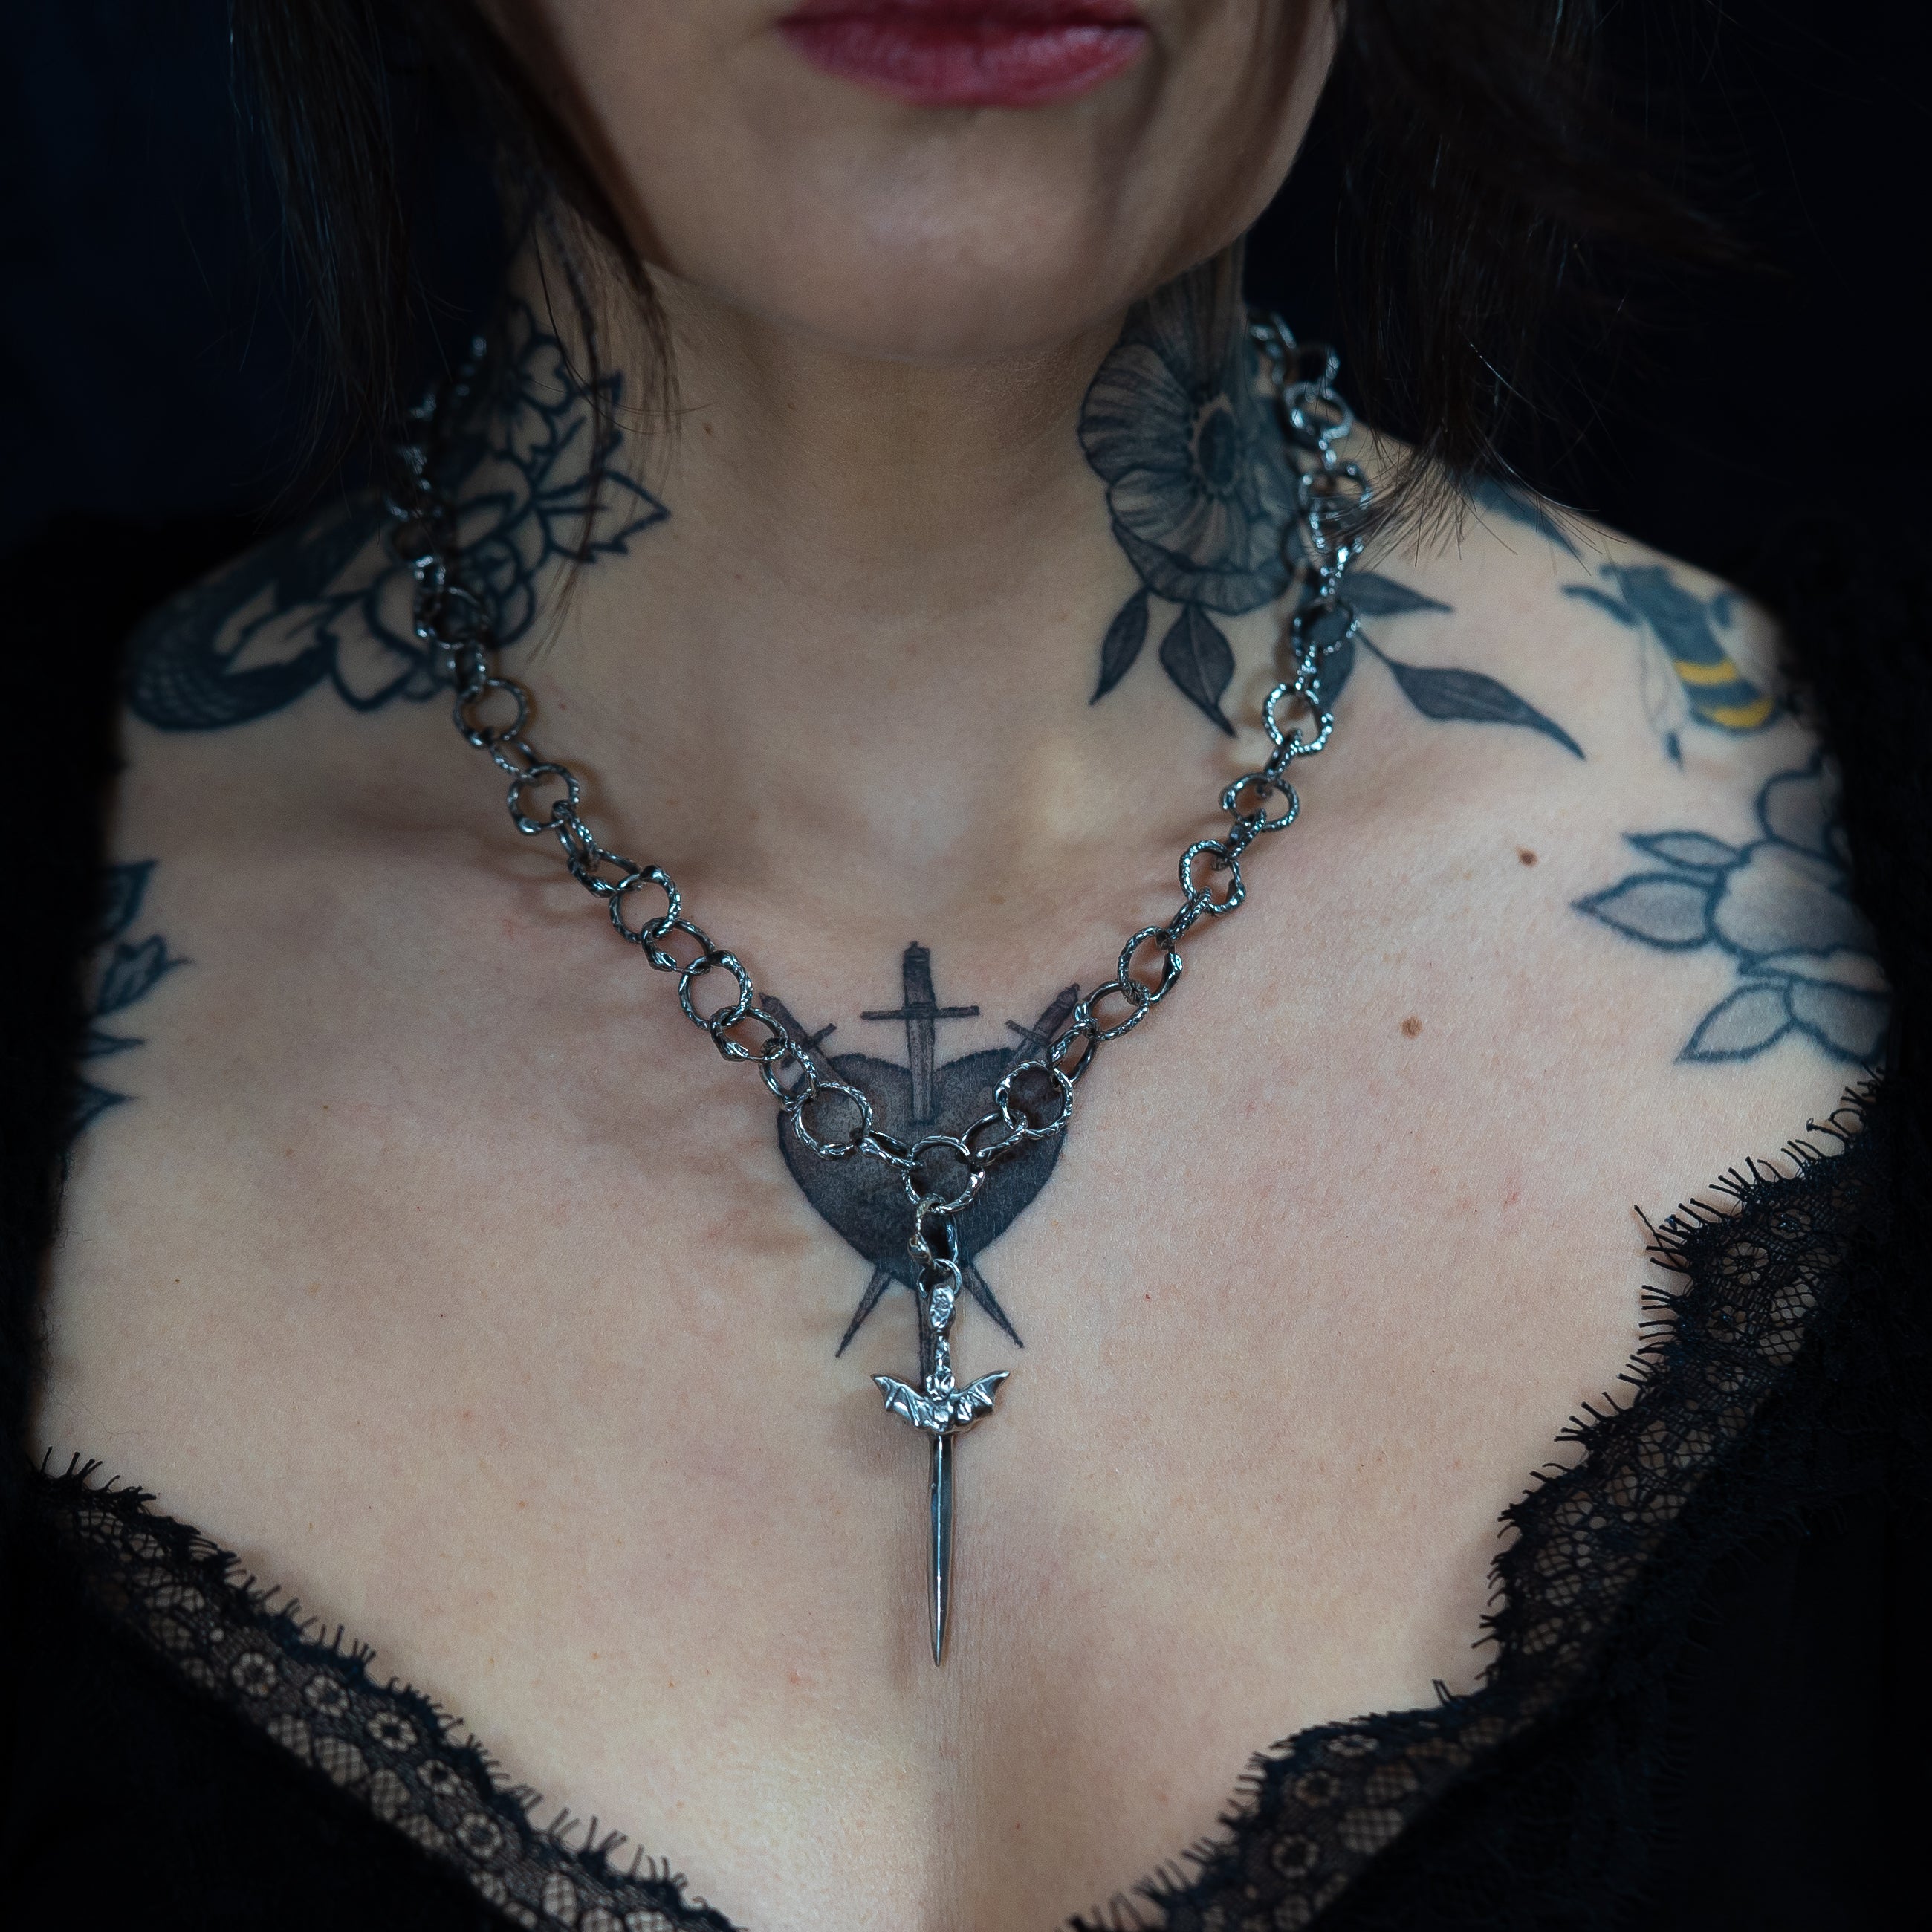 Alternative model with neck tattoos wearing snake chain link necklace with dagger pendant